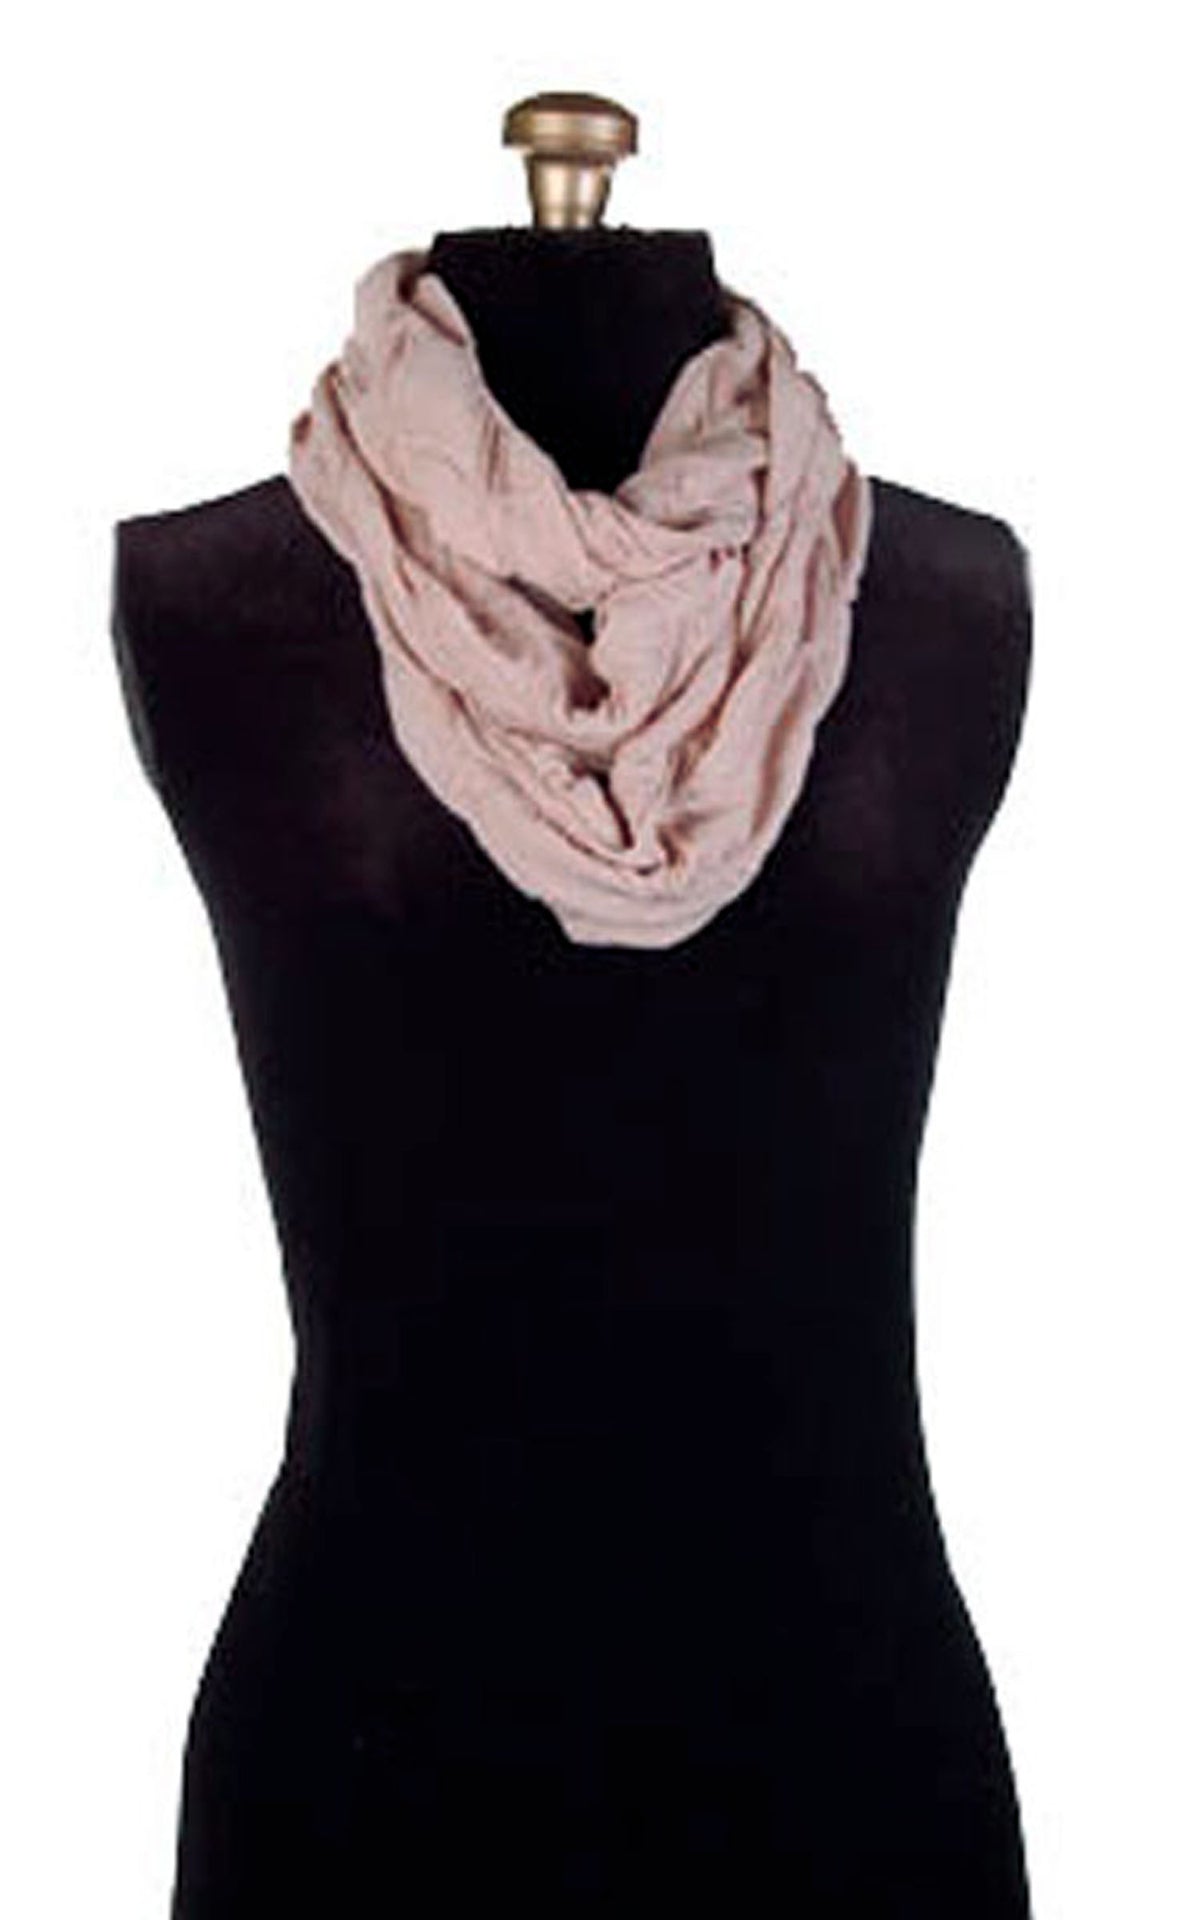 INFINITY SCARF - Handmade in Seattle, WA, USA. Shown in Entangled Romance in Dusty Rose and Cloud